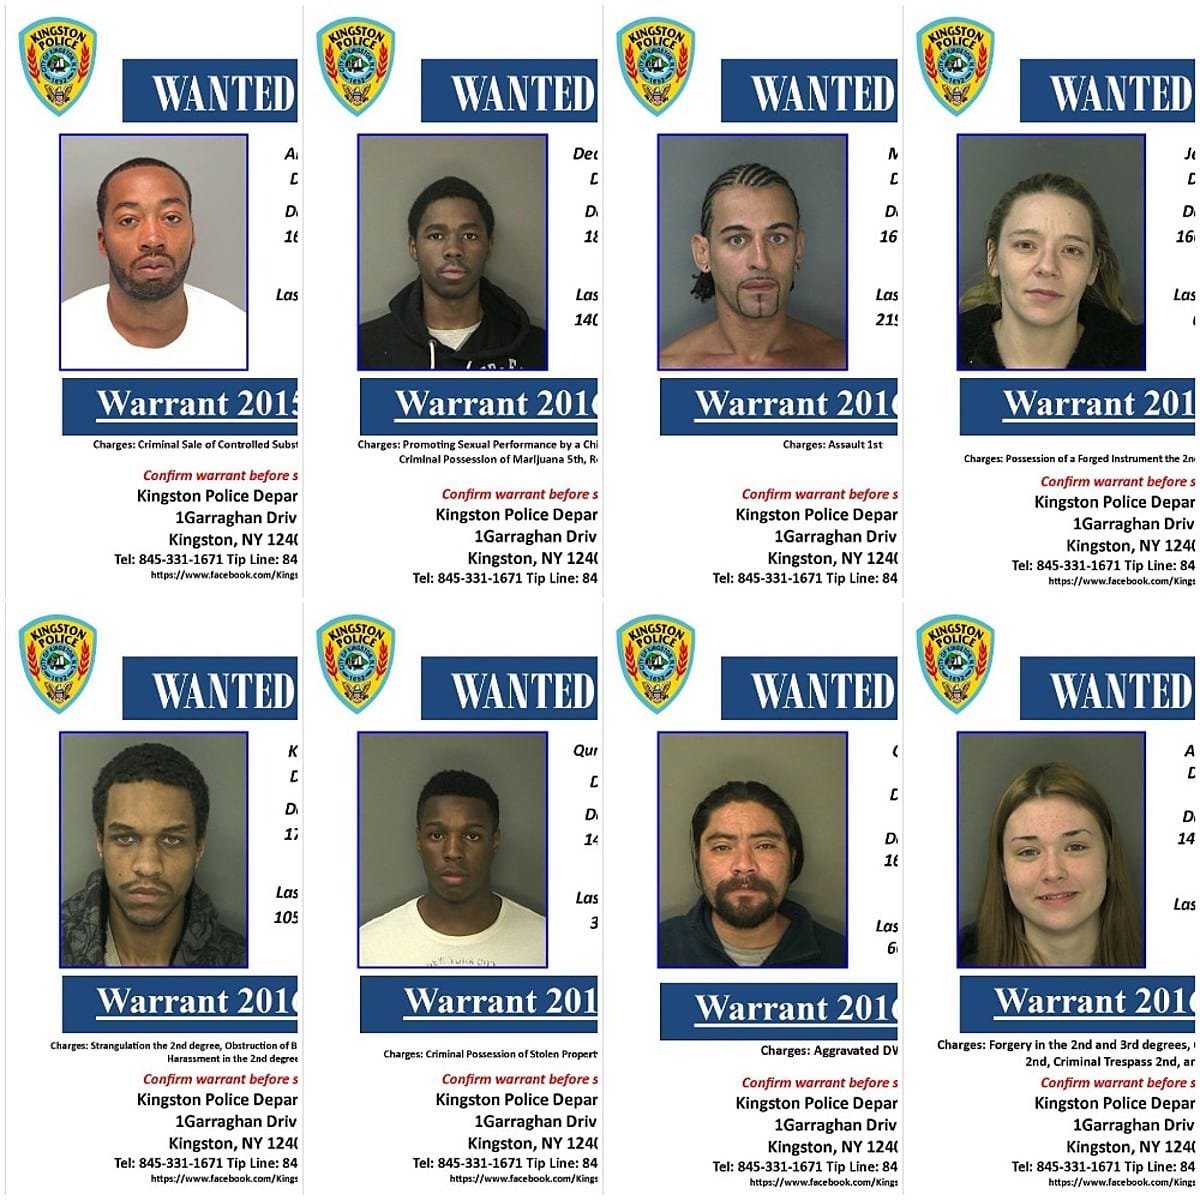 Have You Seen These 9 People Who Are Wanted In The Hudson Valley?